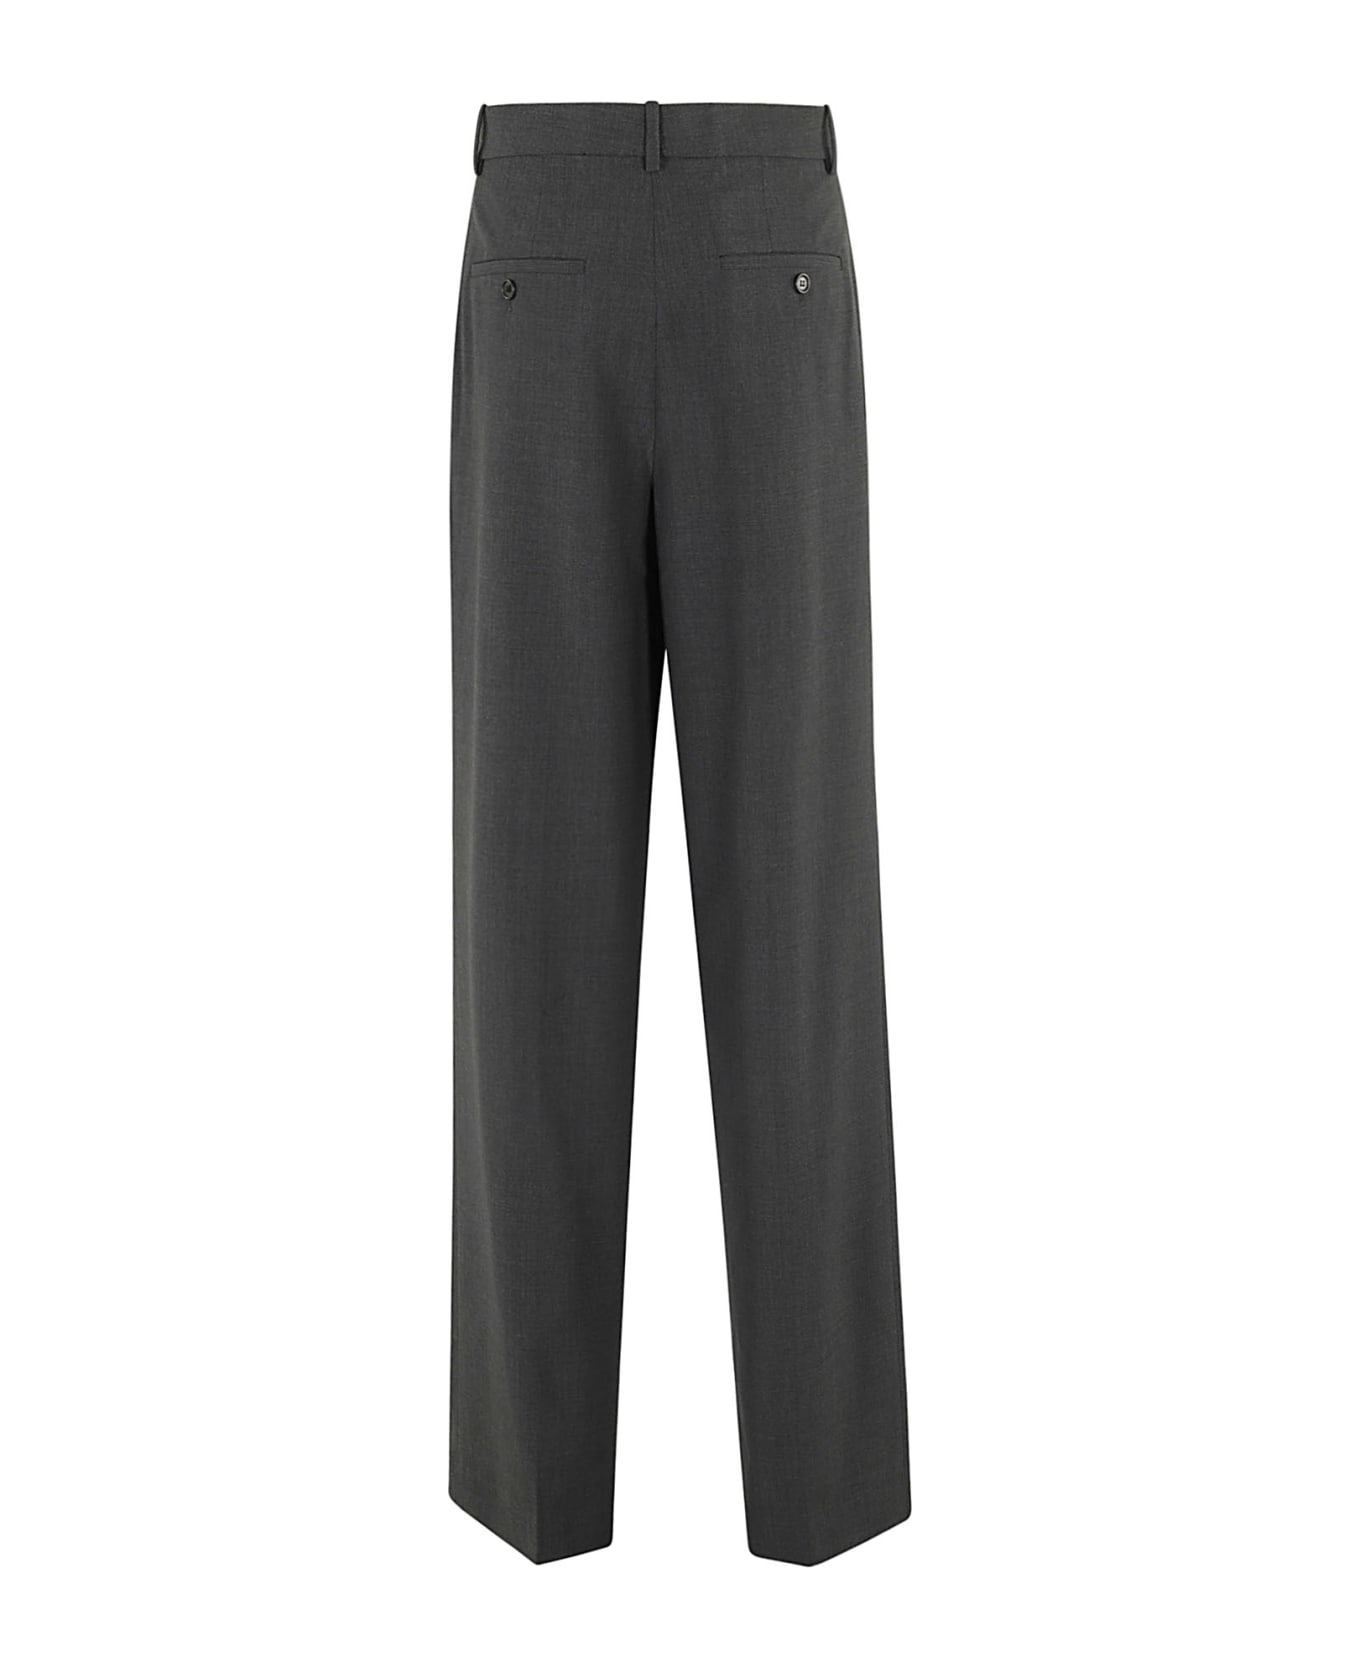 Theory Dbl Pleat - Charcoal Melange